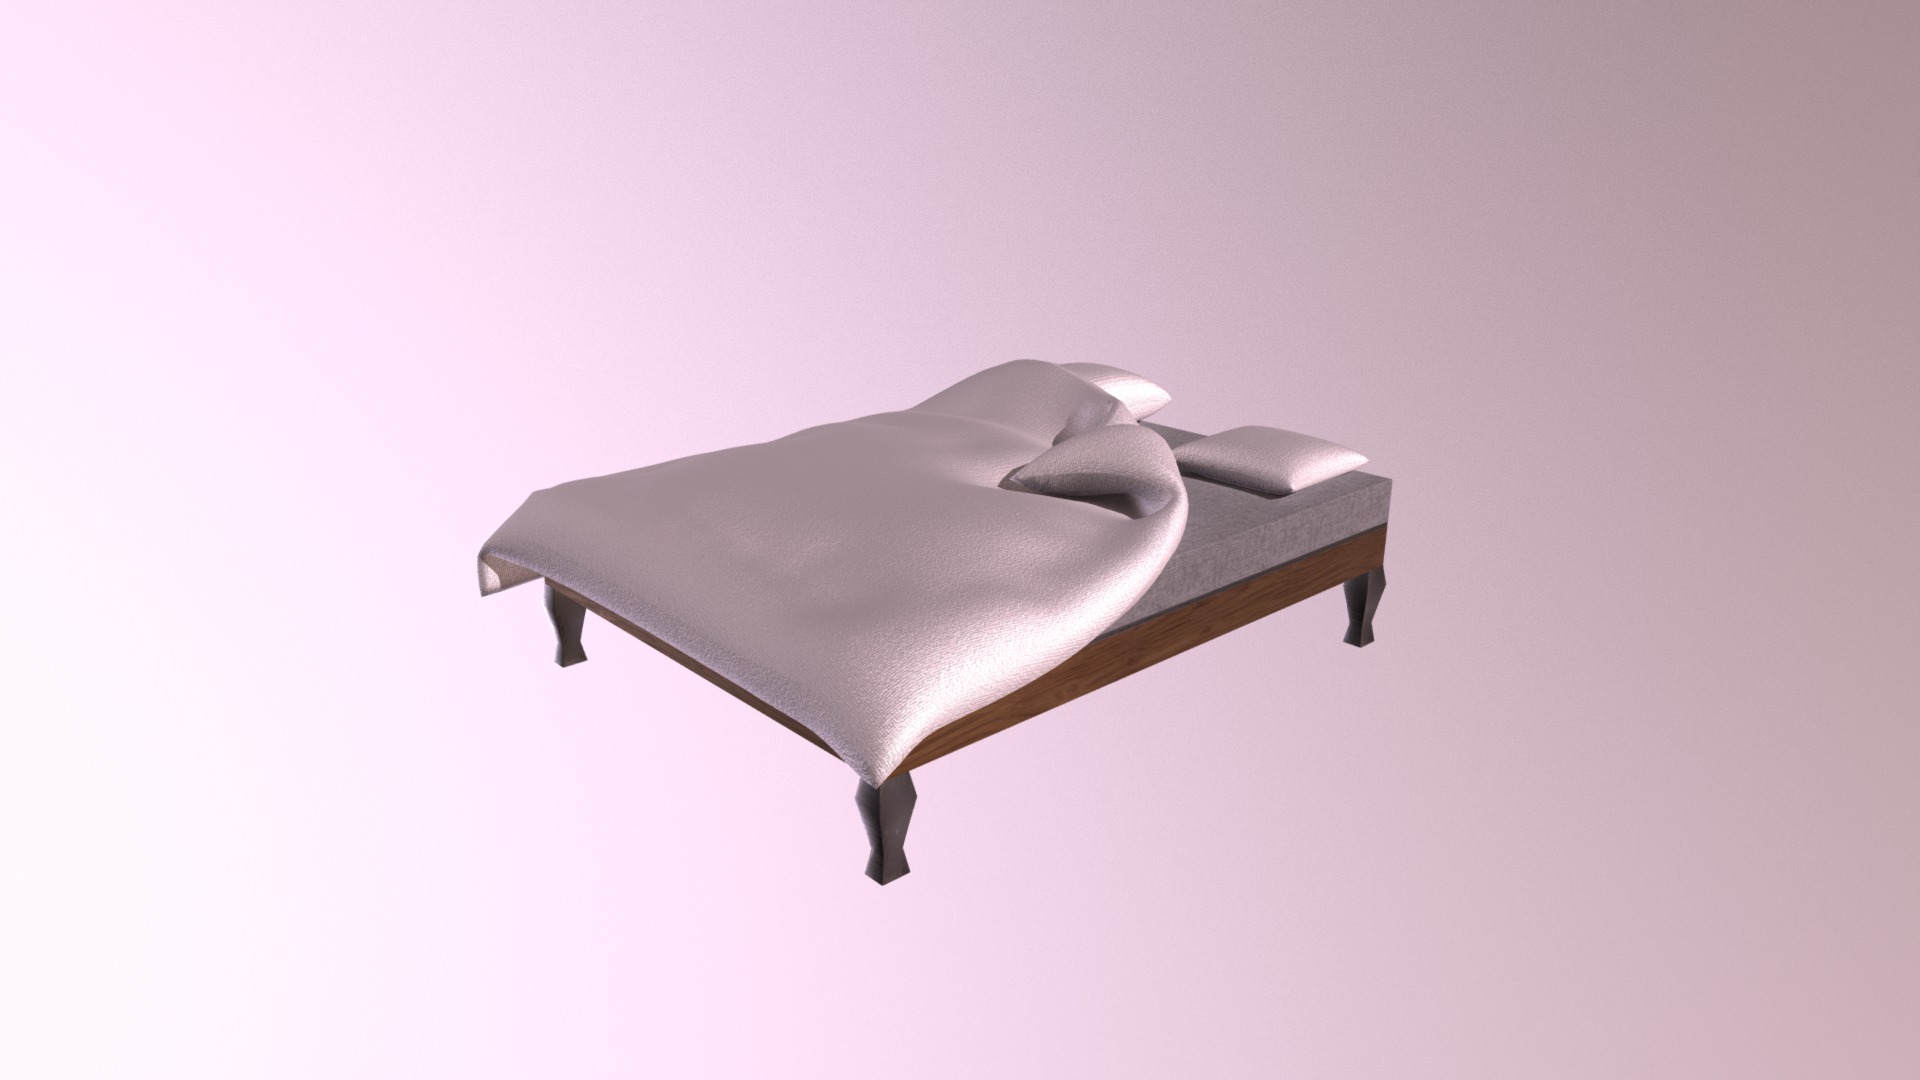 3D model BED - This is a 3D model of the BED. The 3D model is about a grey chair with a grey cushion.